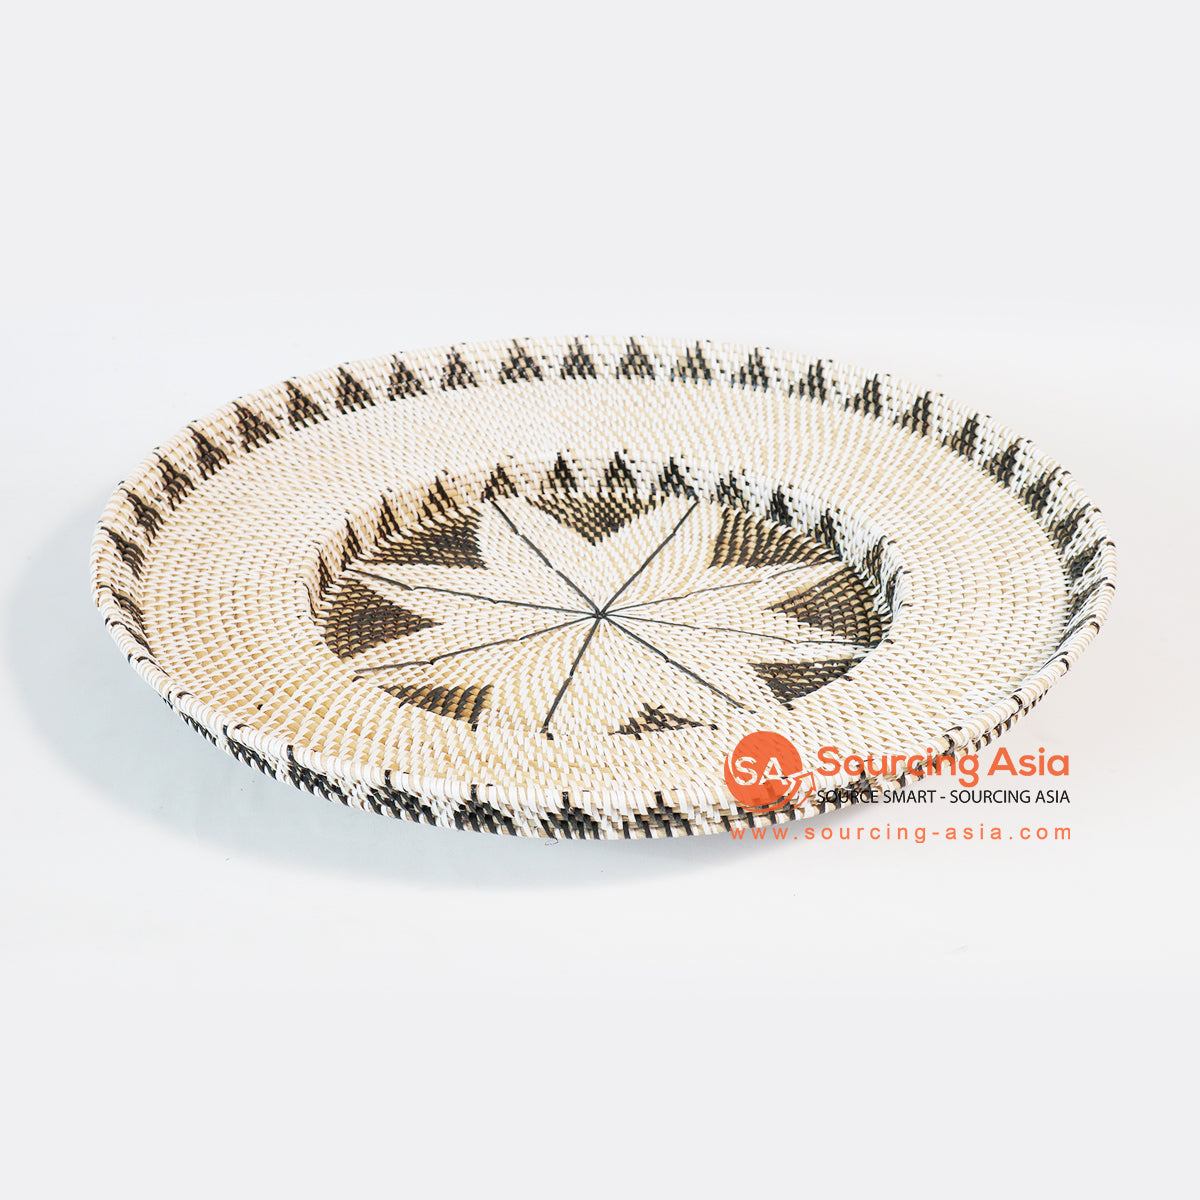 MTIC008-4 DARK BROWN AND NATURAL WOVEN RATTAN TRAY